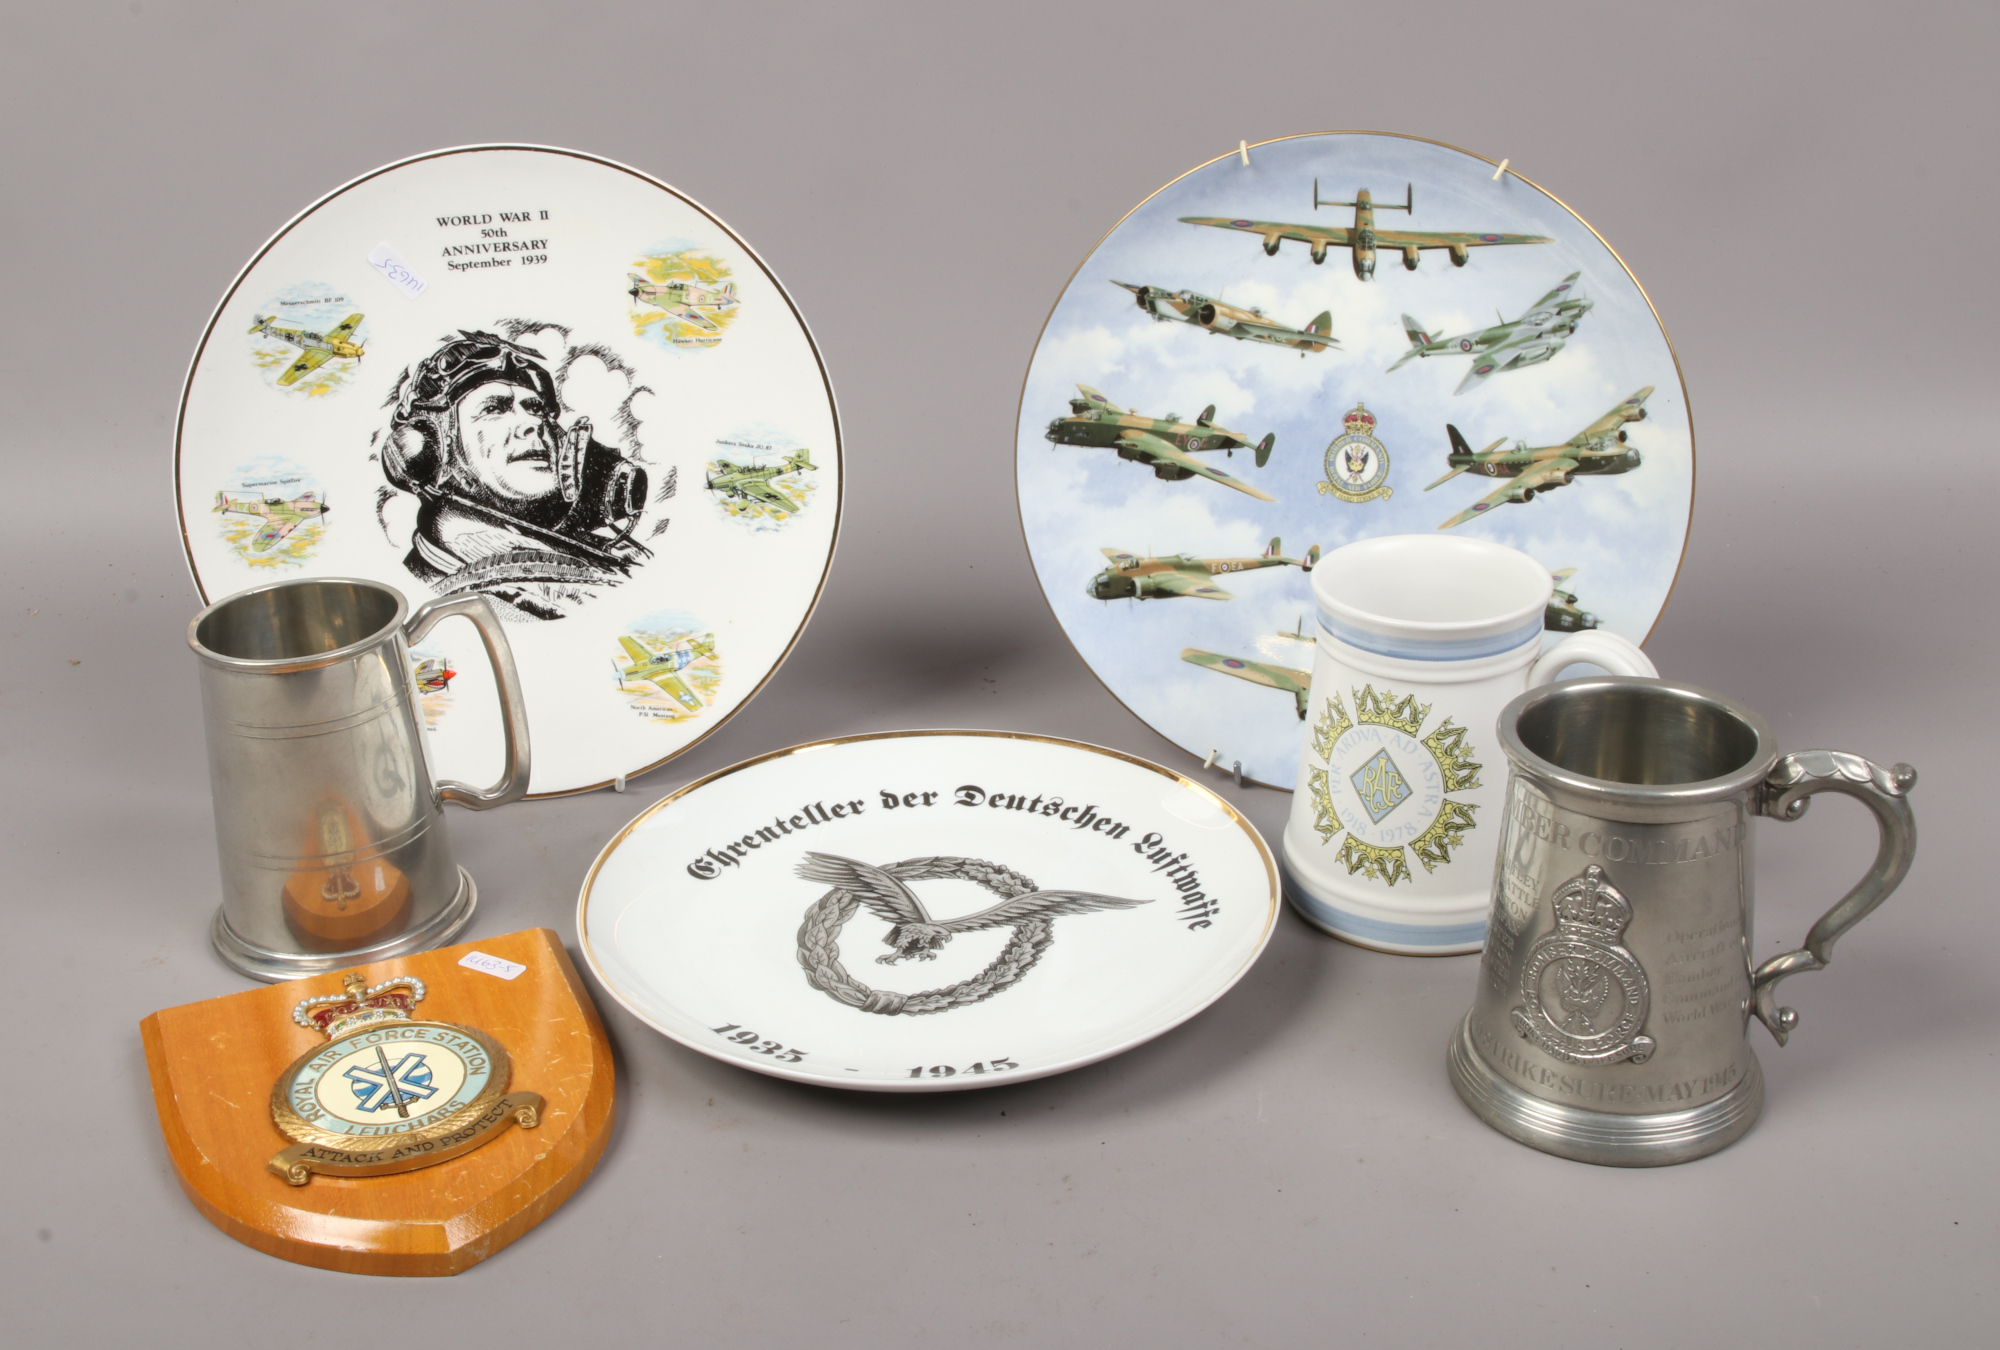 An English pewter tankard commemorating World War II Bomber Command and other RAF and Luftwaffe